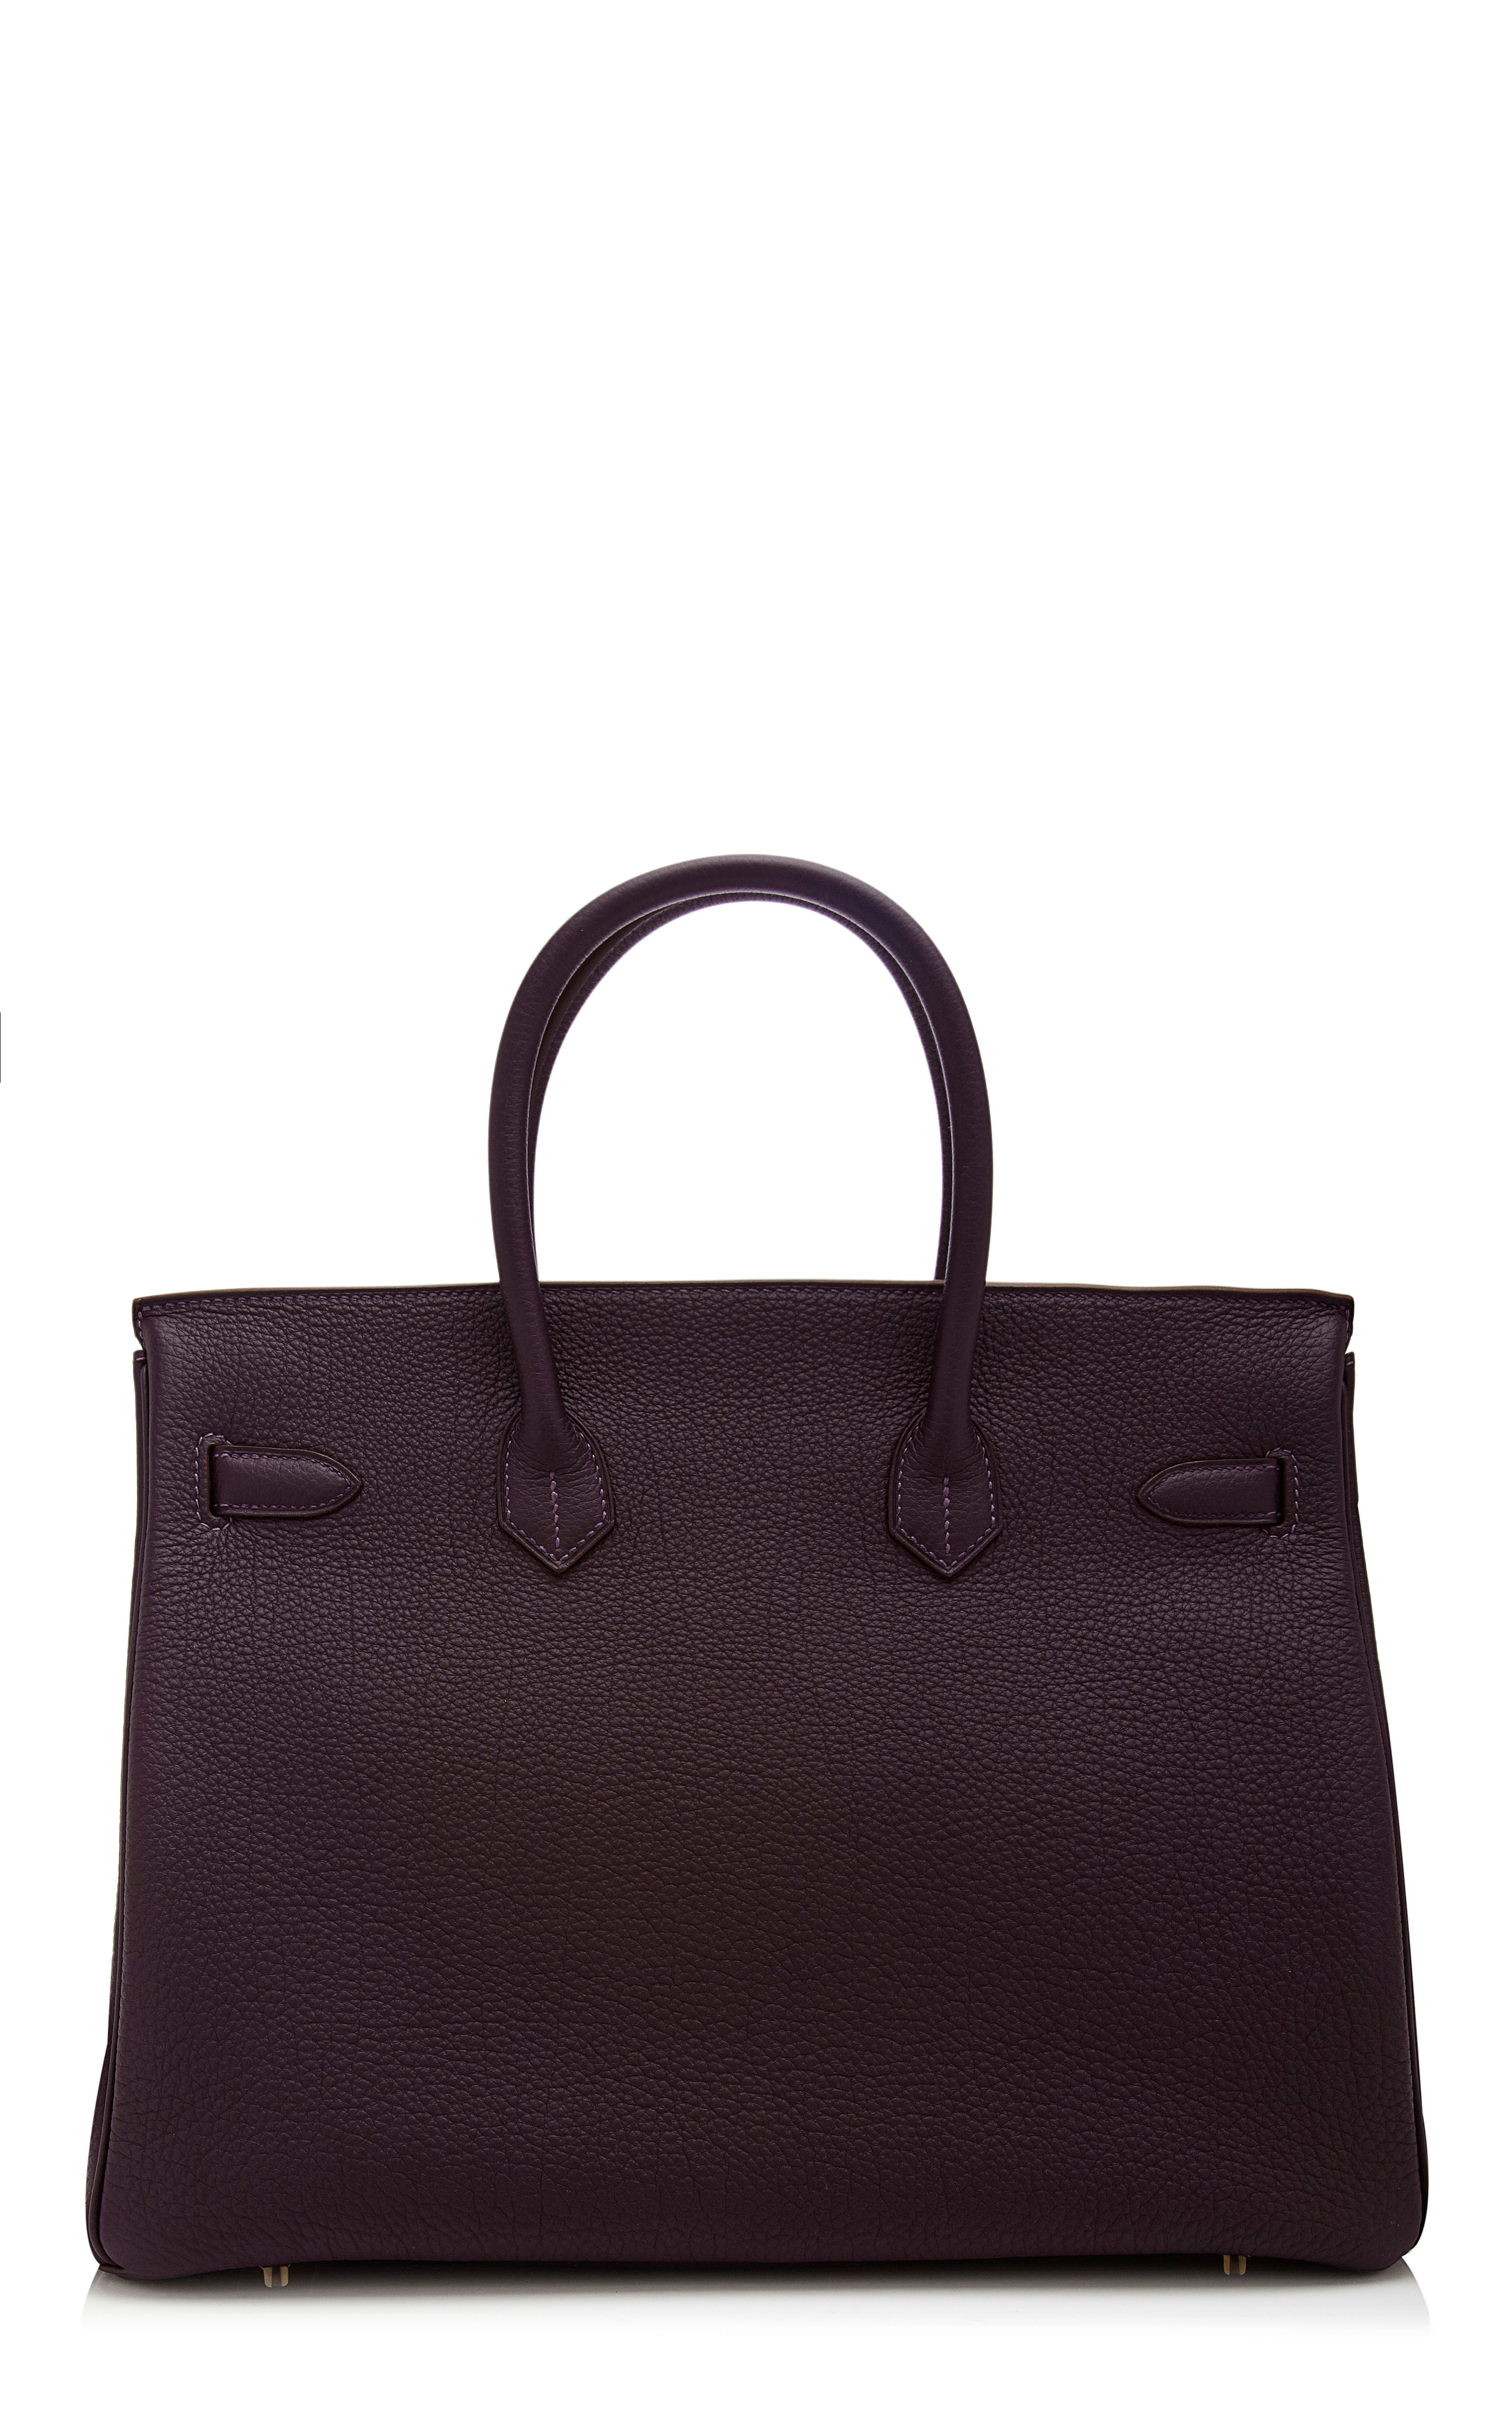 Heritage auctions special collection 35cm Hermes Raisin Togo ...